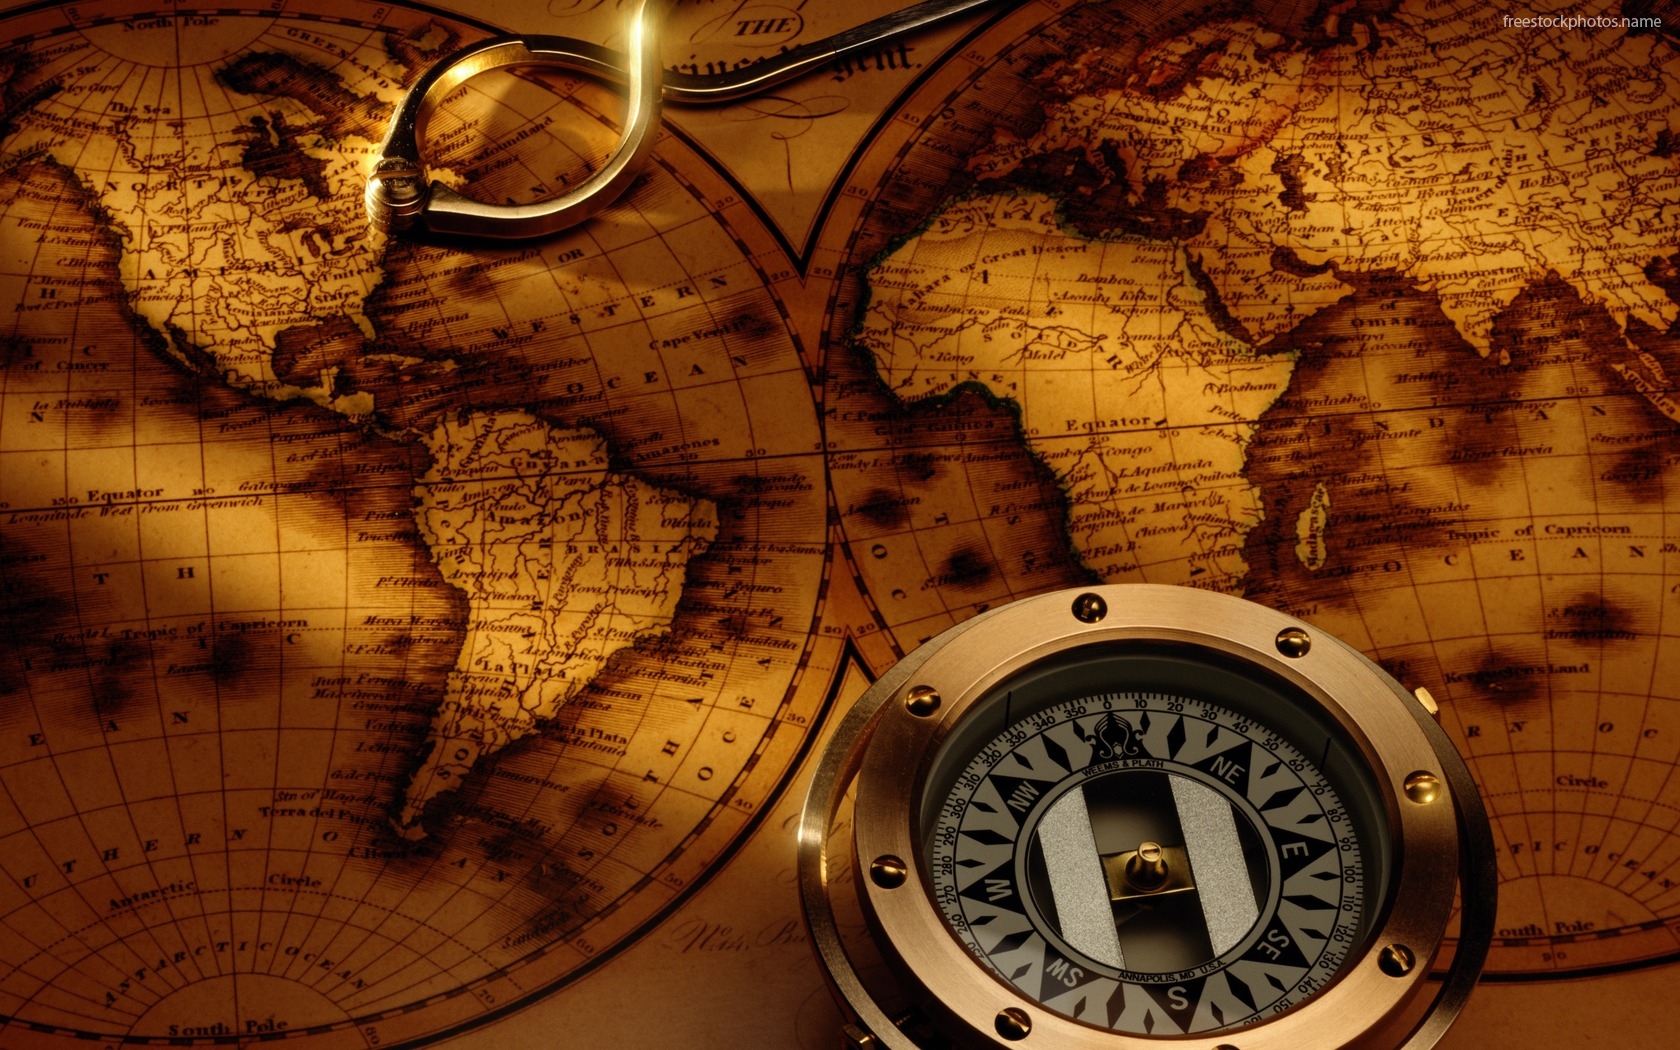 Download Stock Photos of old world map with compass images photography